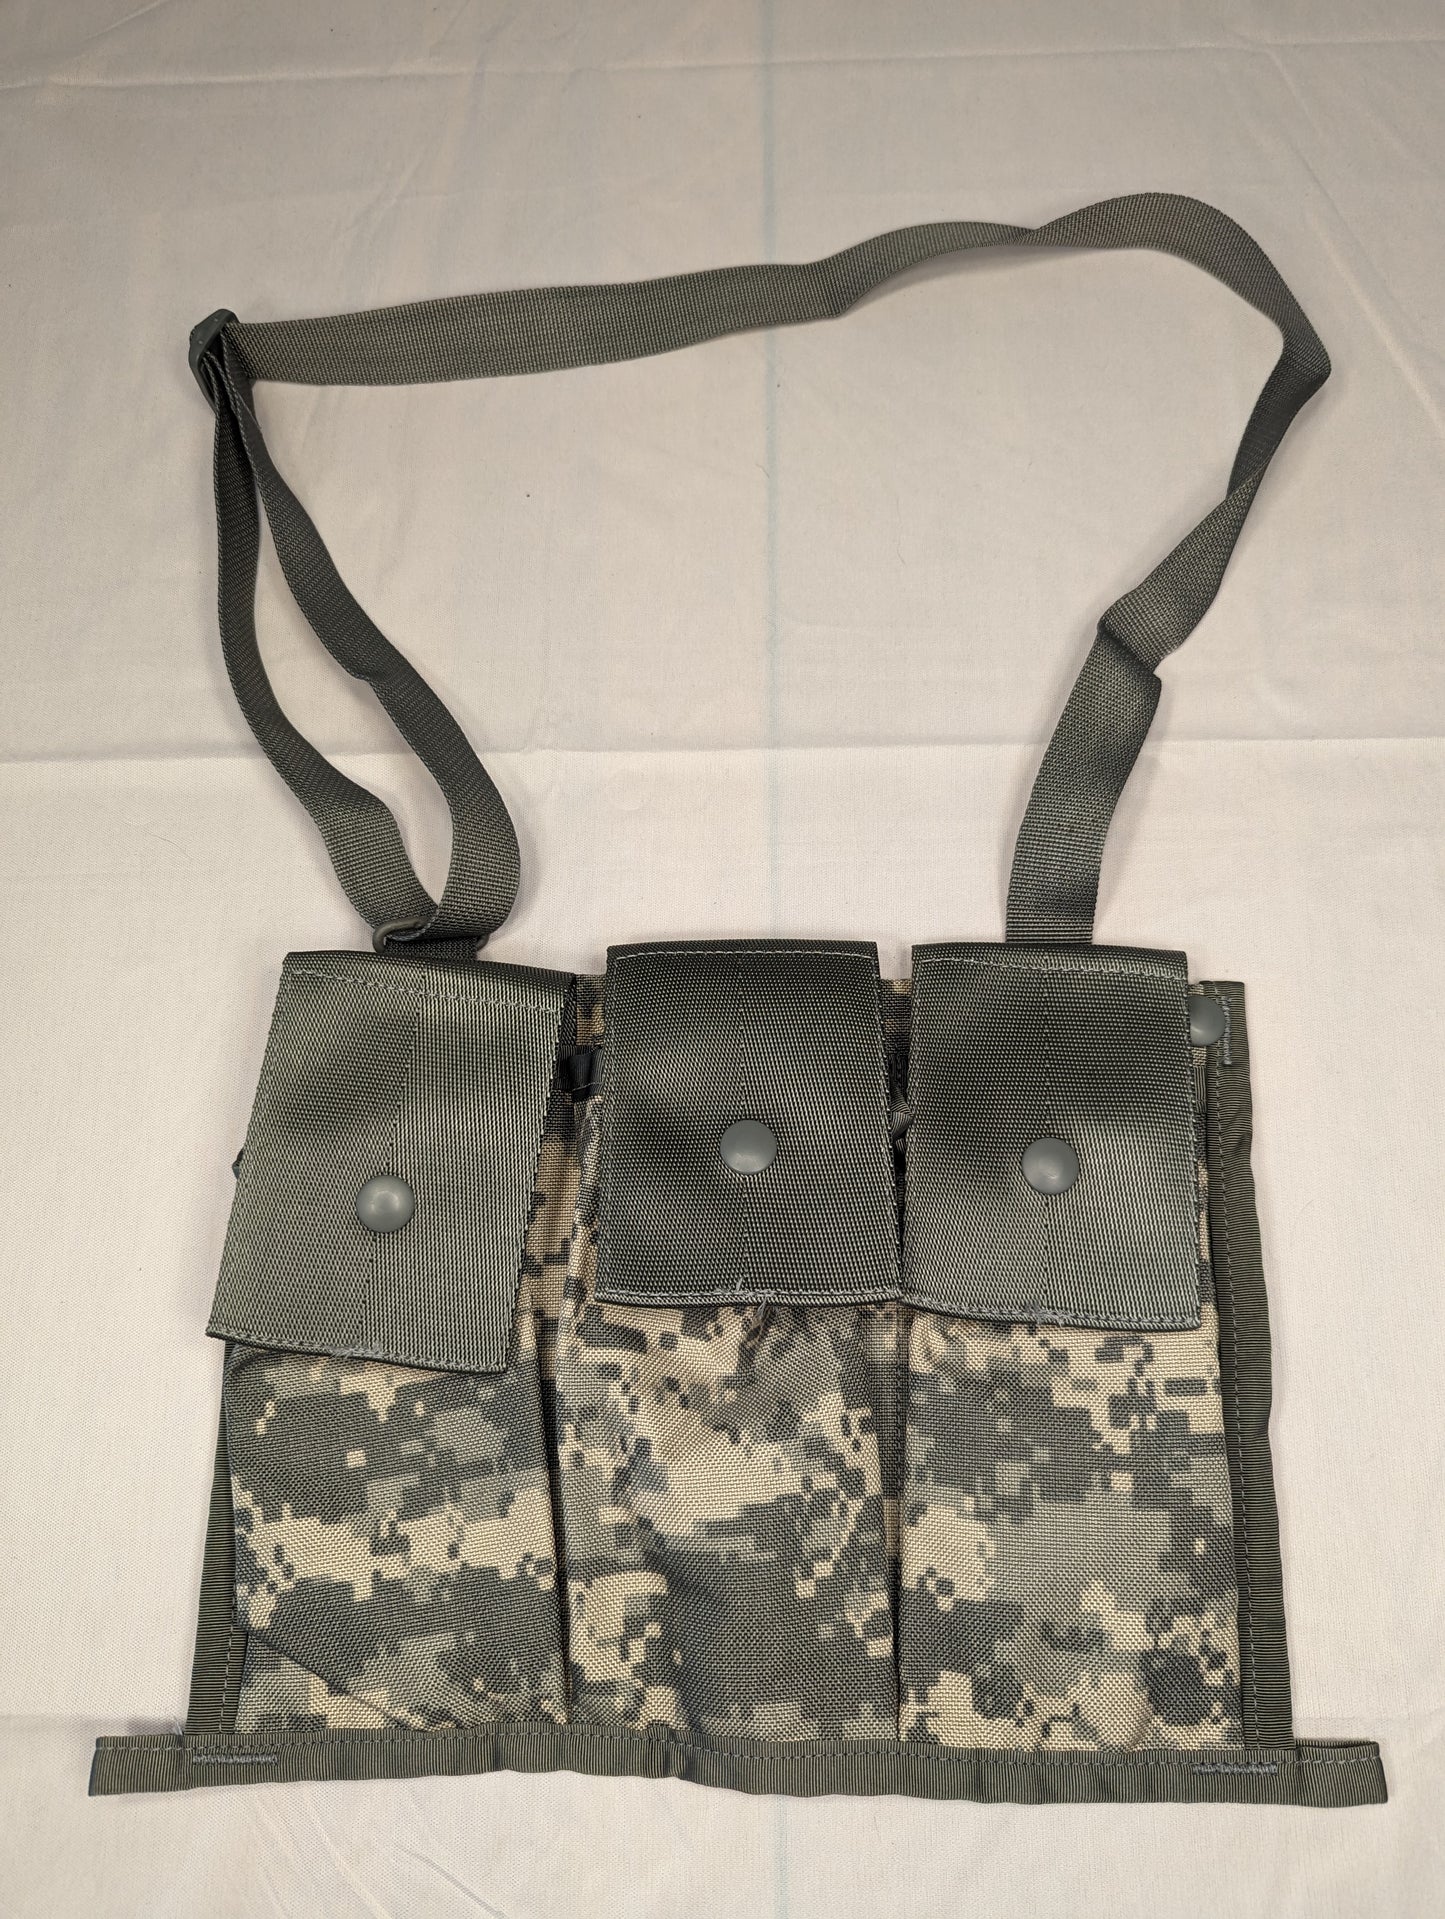 2 ACU Bandoleer Pouch 6 Mag MOLLE Mag Military Army Pouches Camo